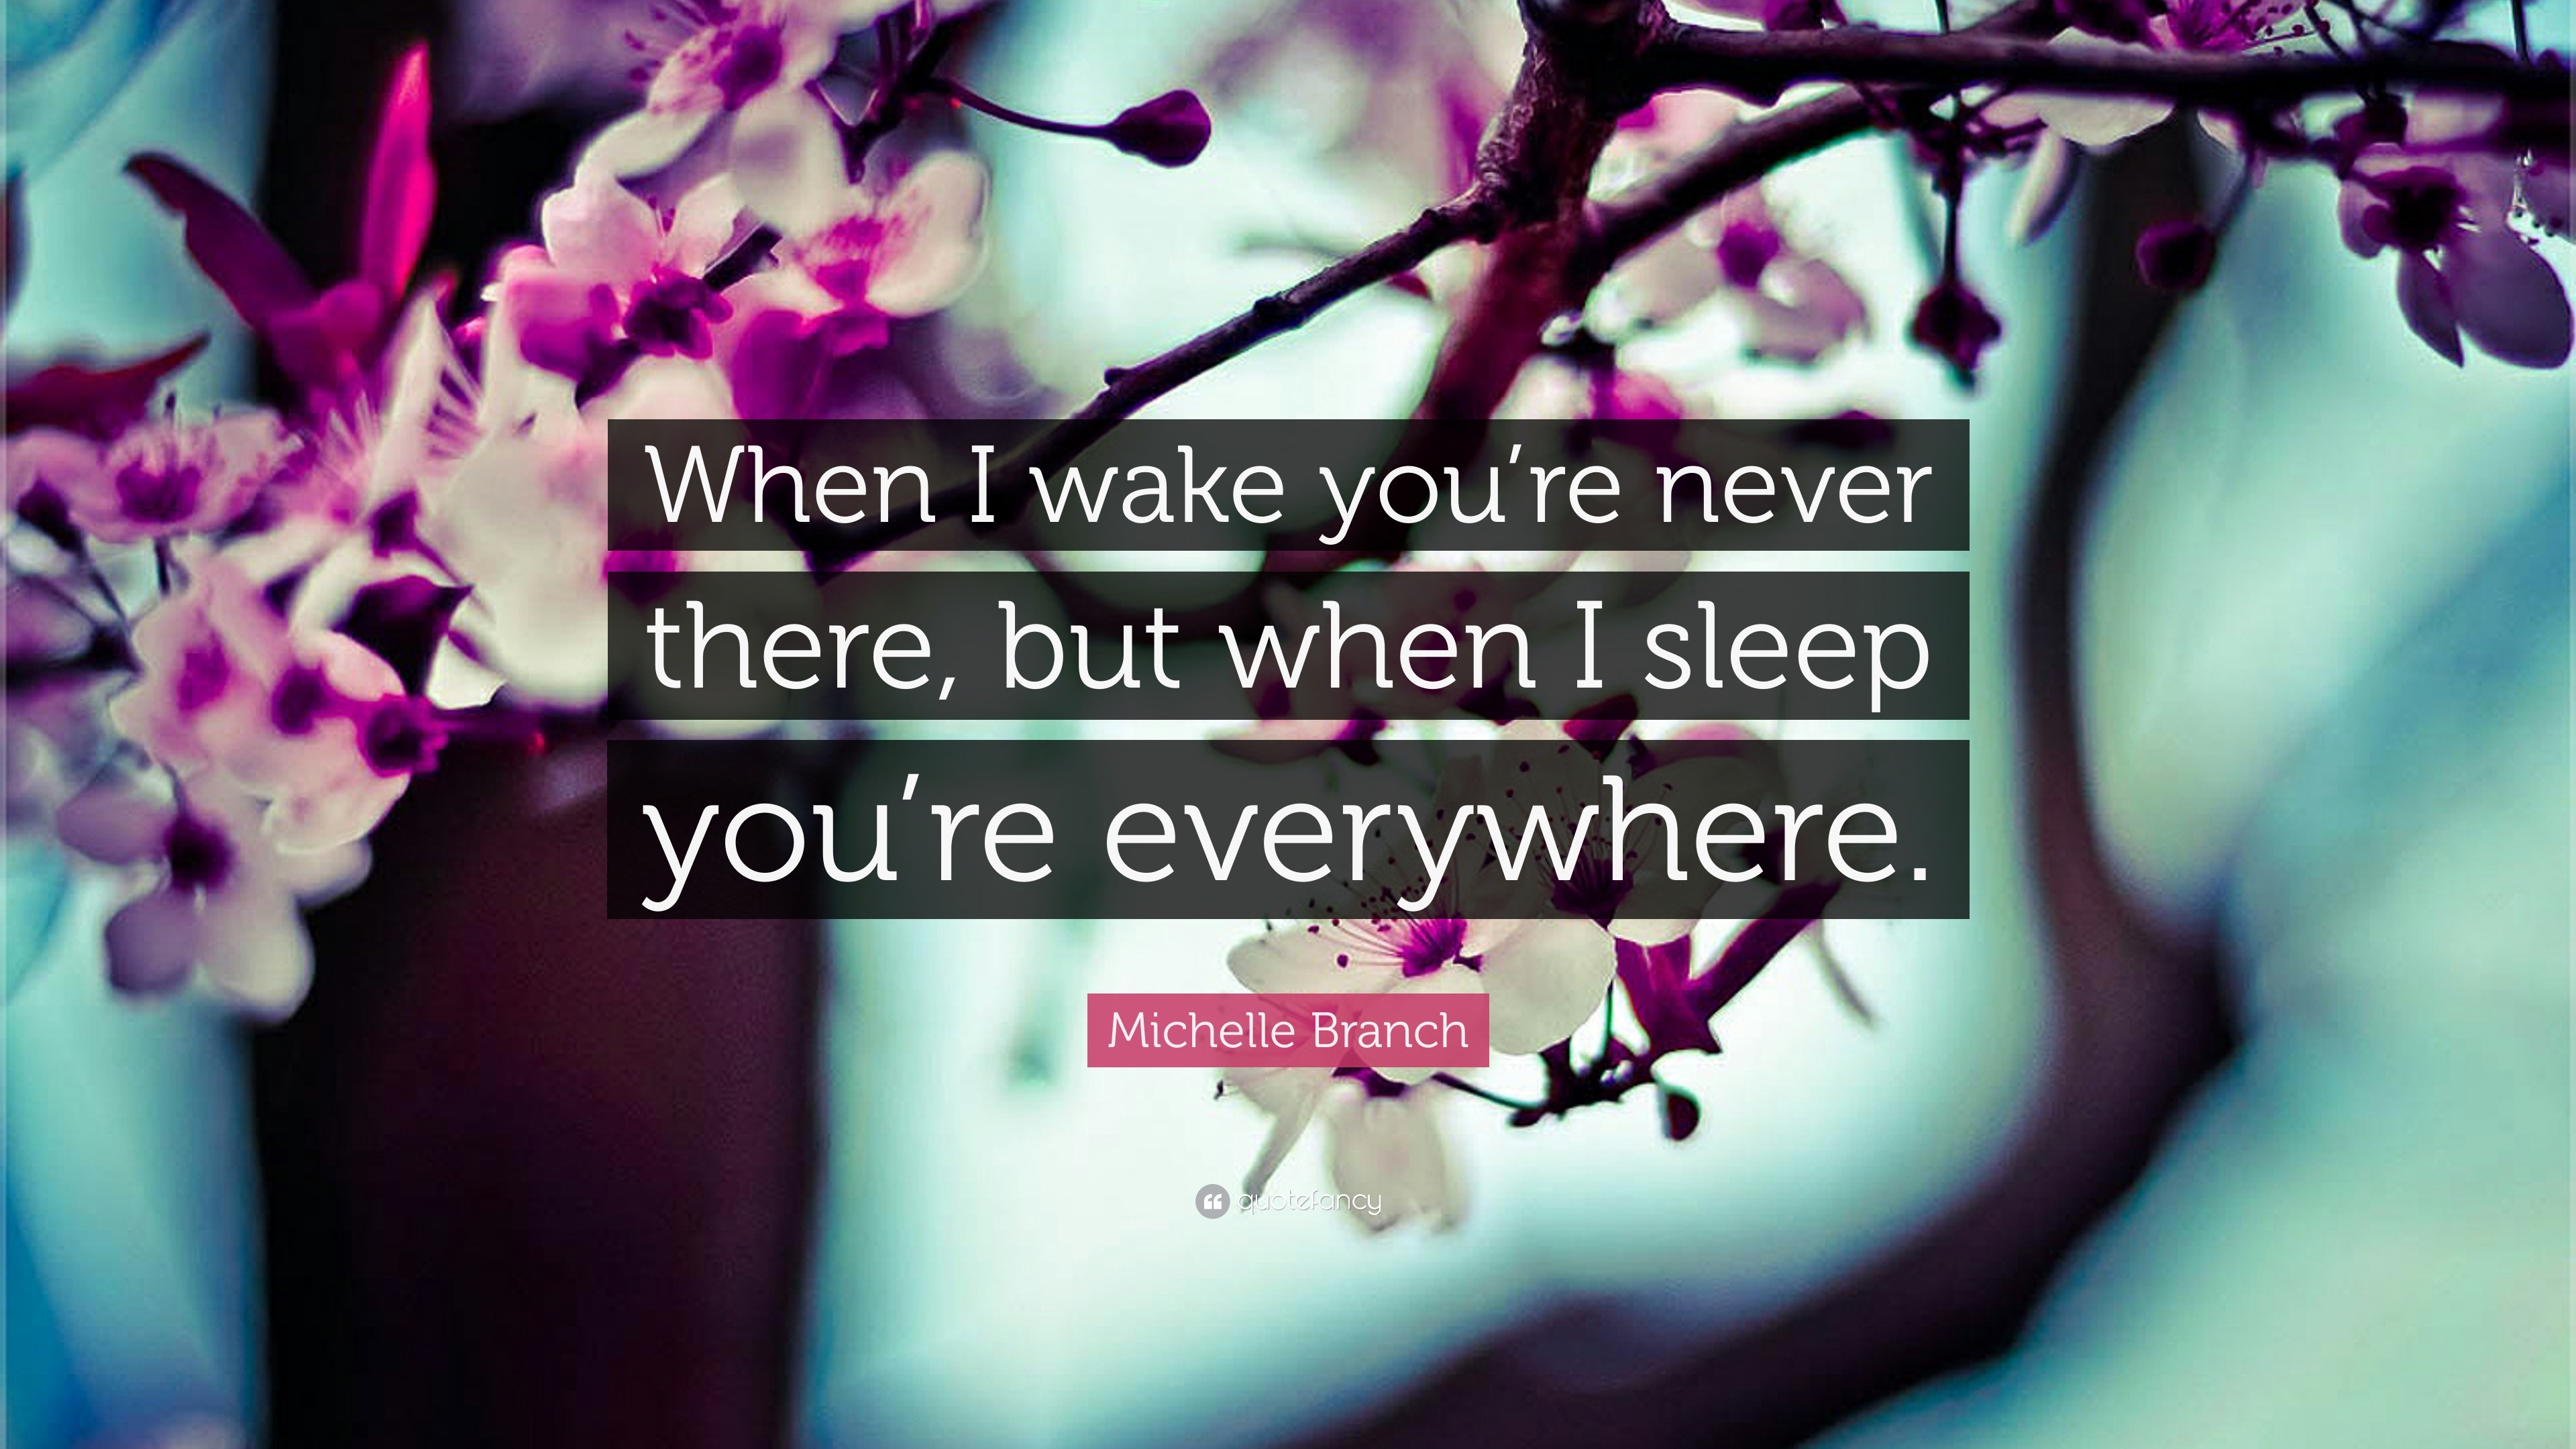 Michelle Branch quote: When I wake you're never there, but when I sleep